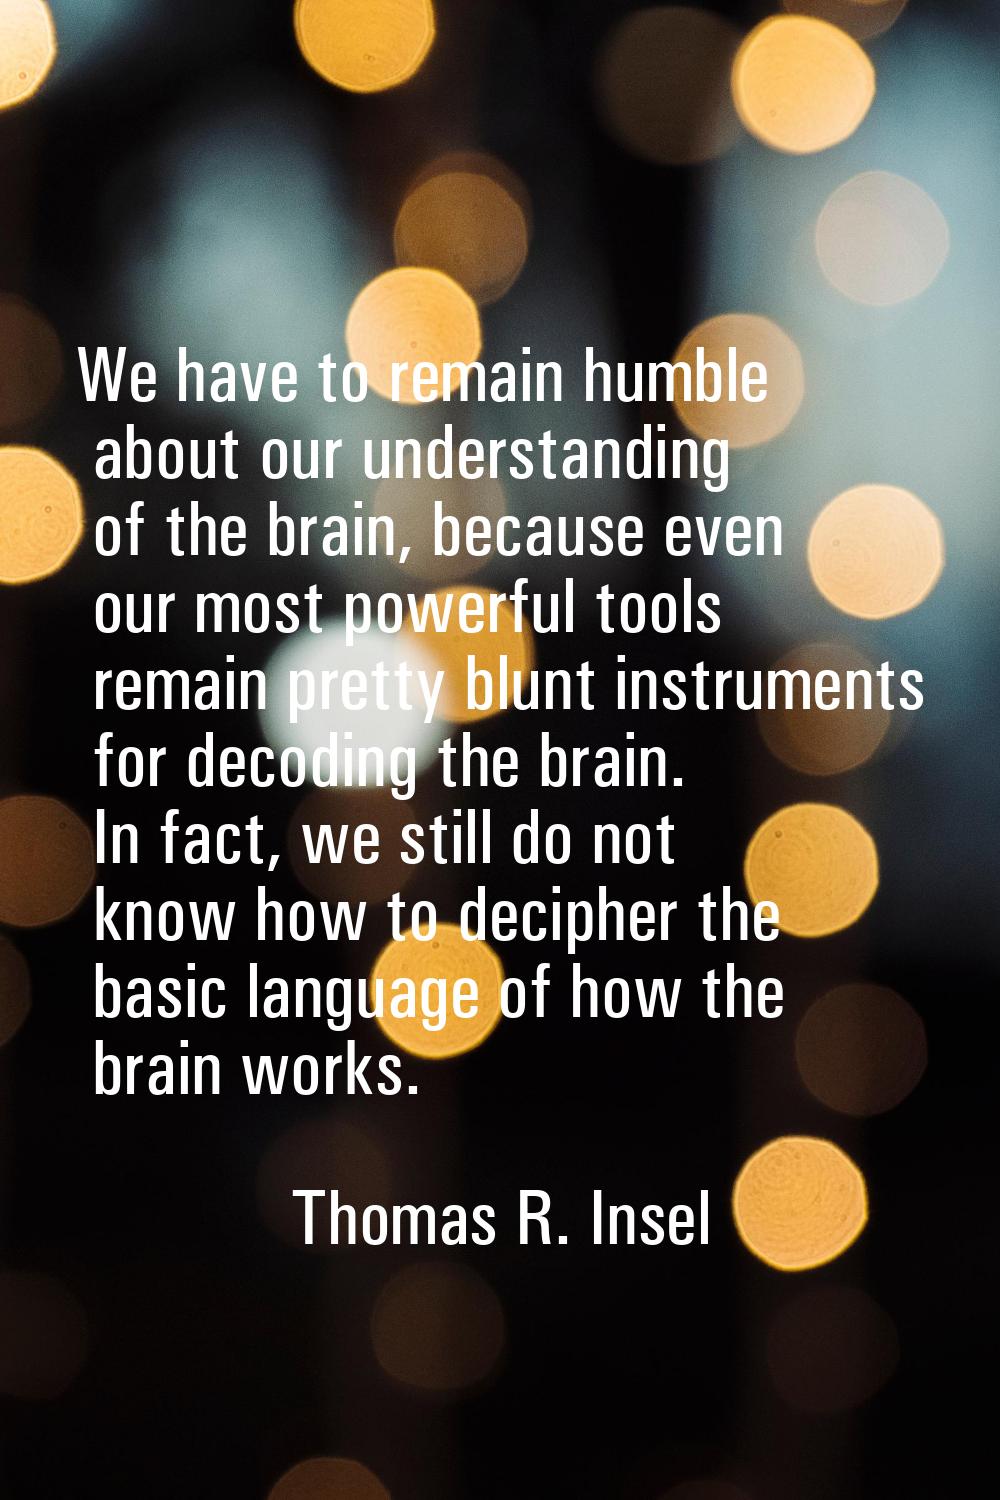 We have to remain humble about our understanding of the brain, because even our most powerful tools